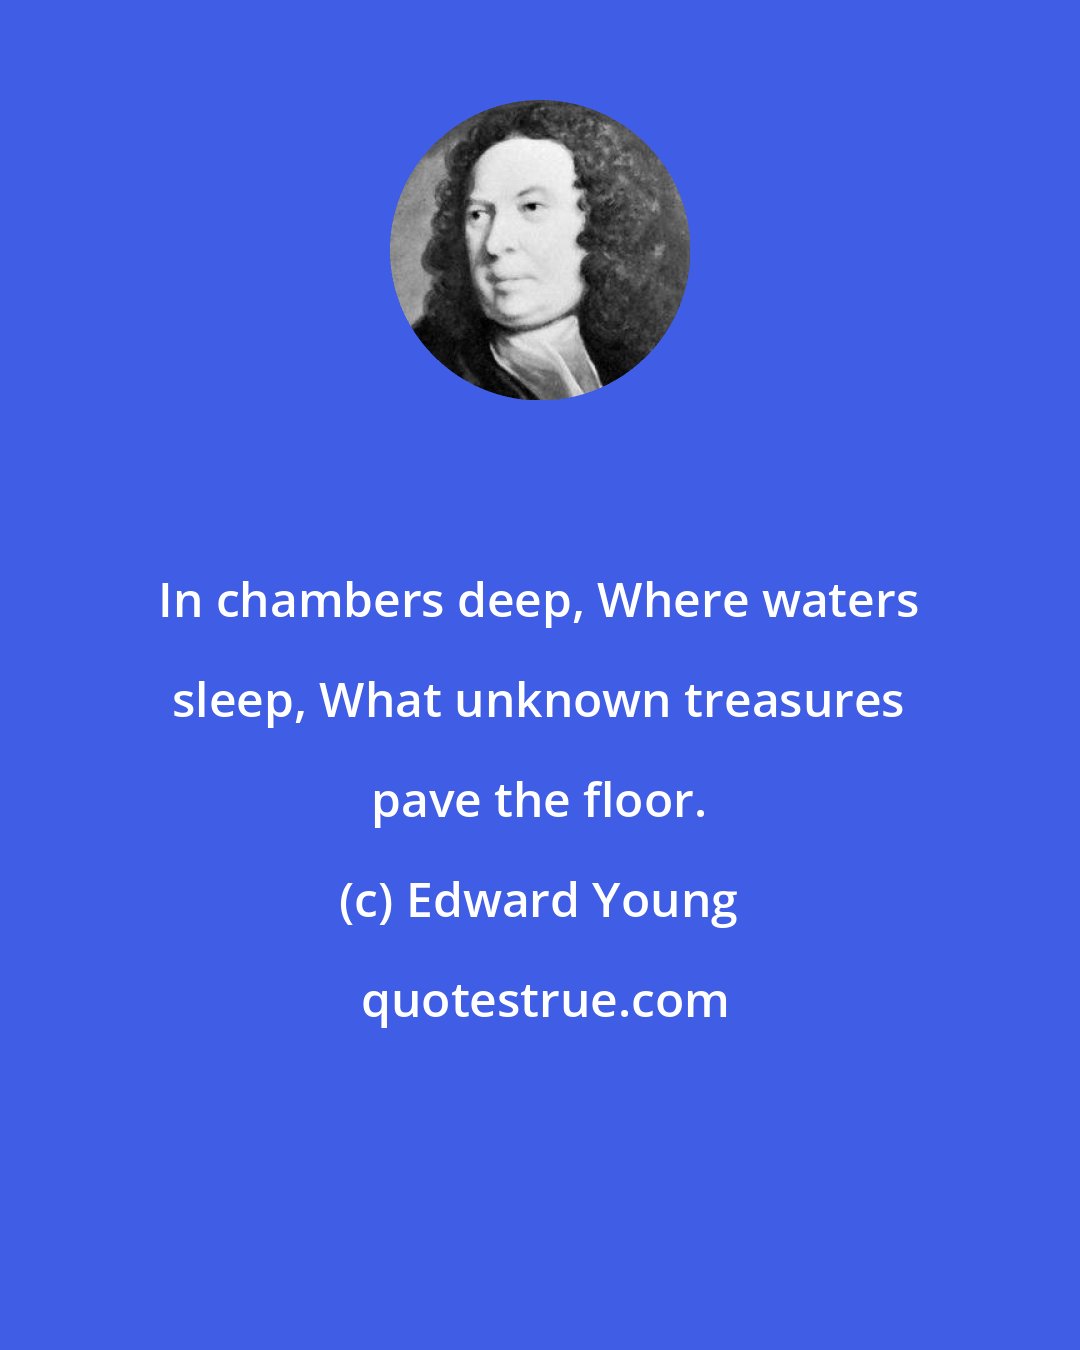 Edward Young: In chambers deep, Where waters sleep, What unknown treasures pave the floor.